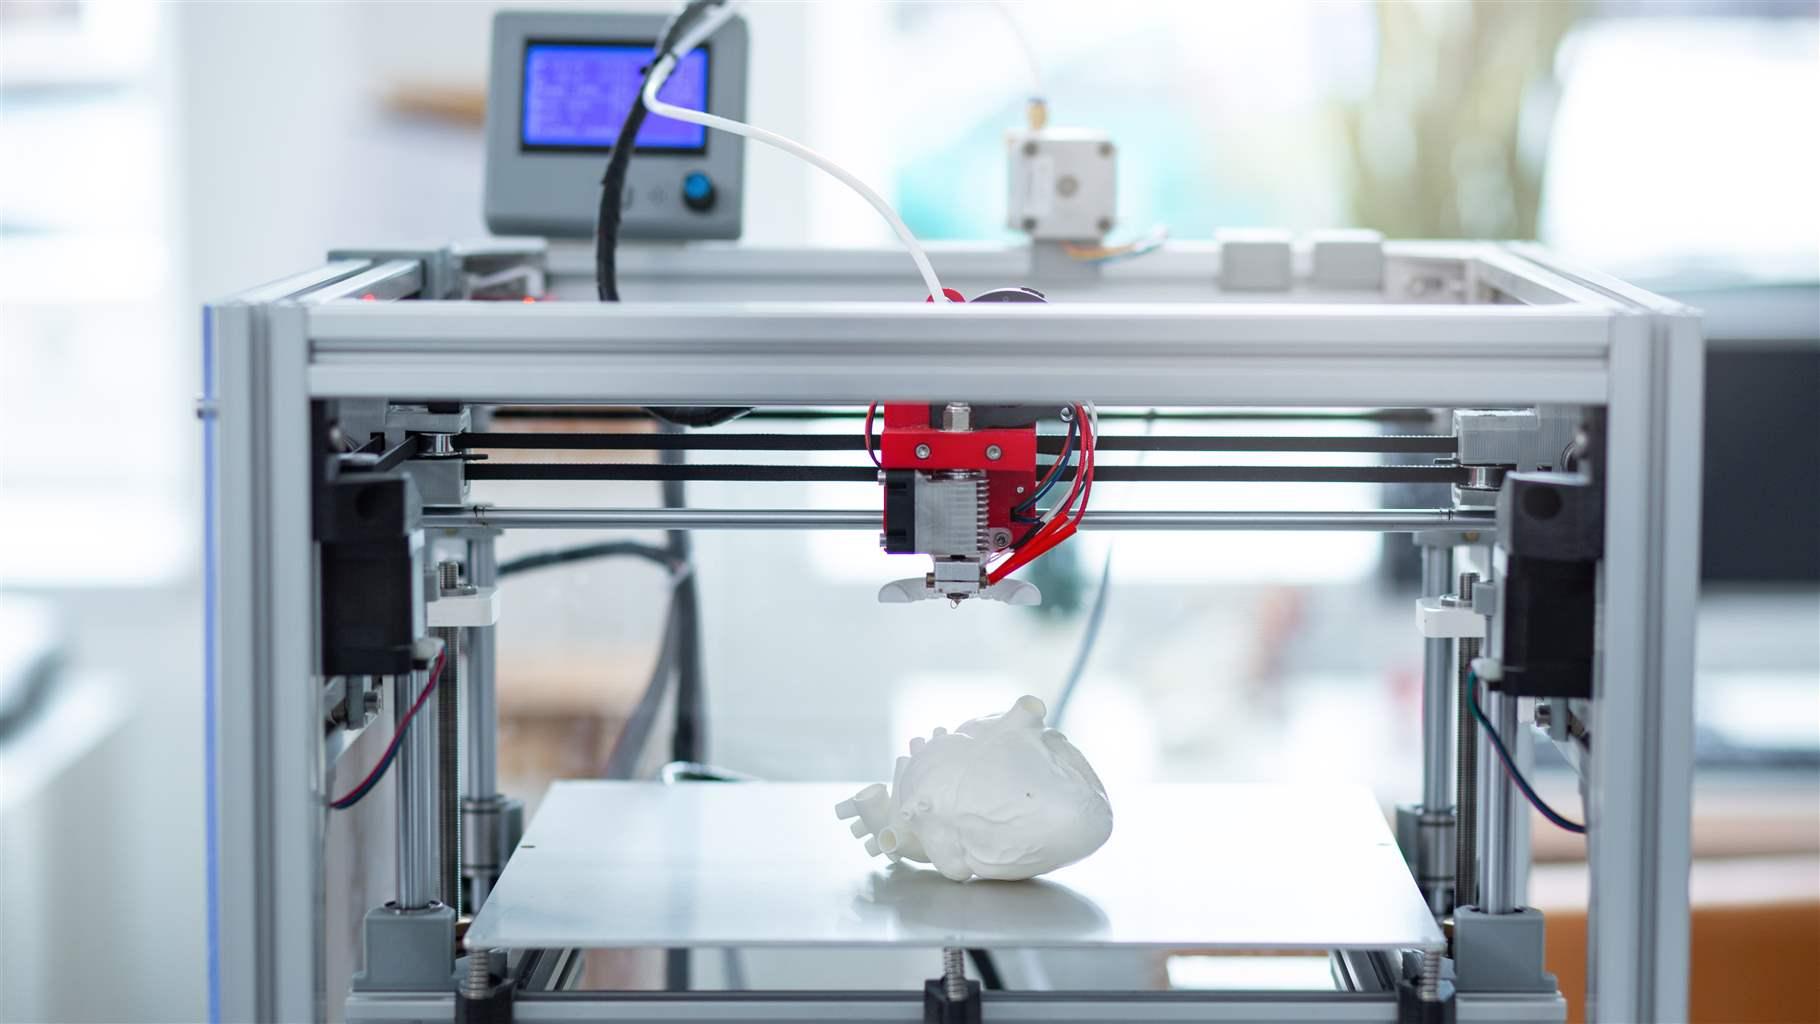 What Is Medical 3D Printing—and How Is it Regulated? | The Pew Charitable Trusts